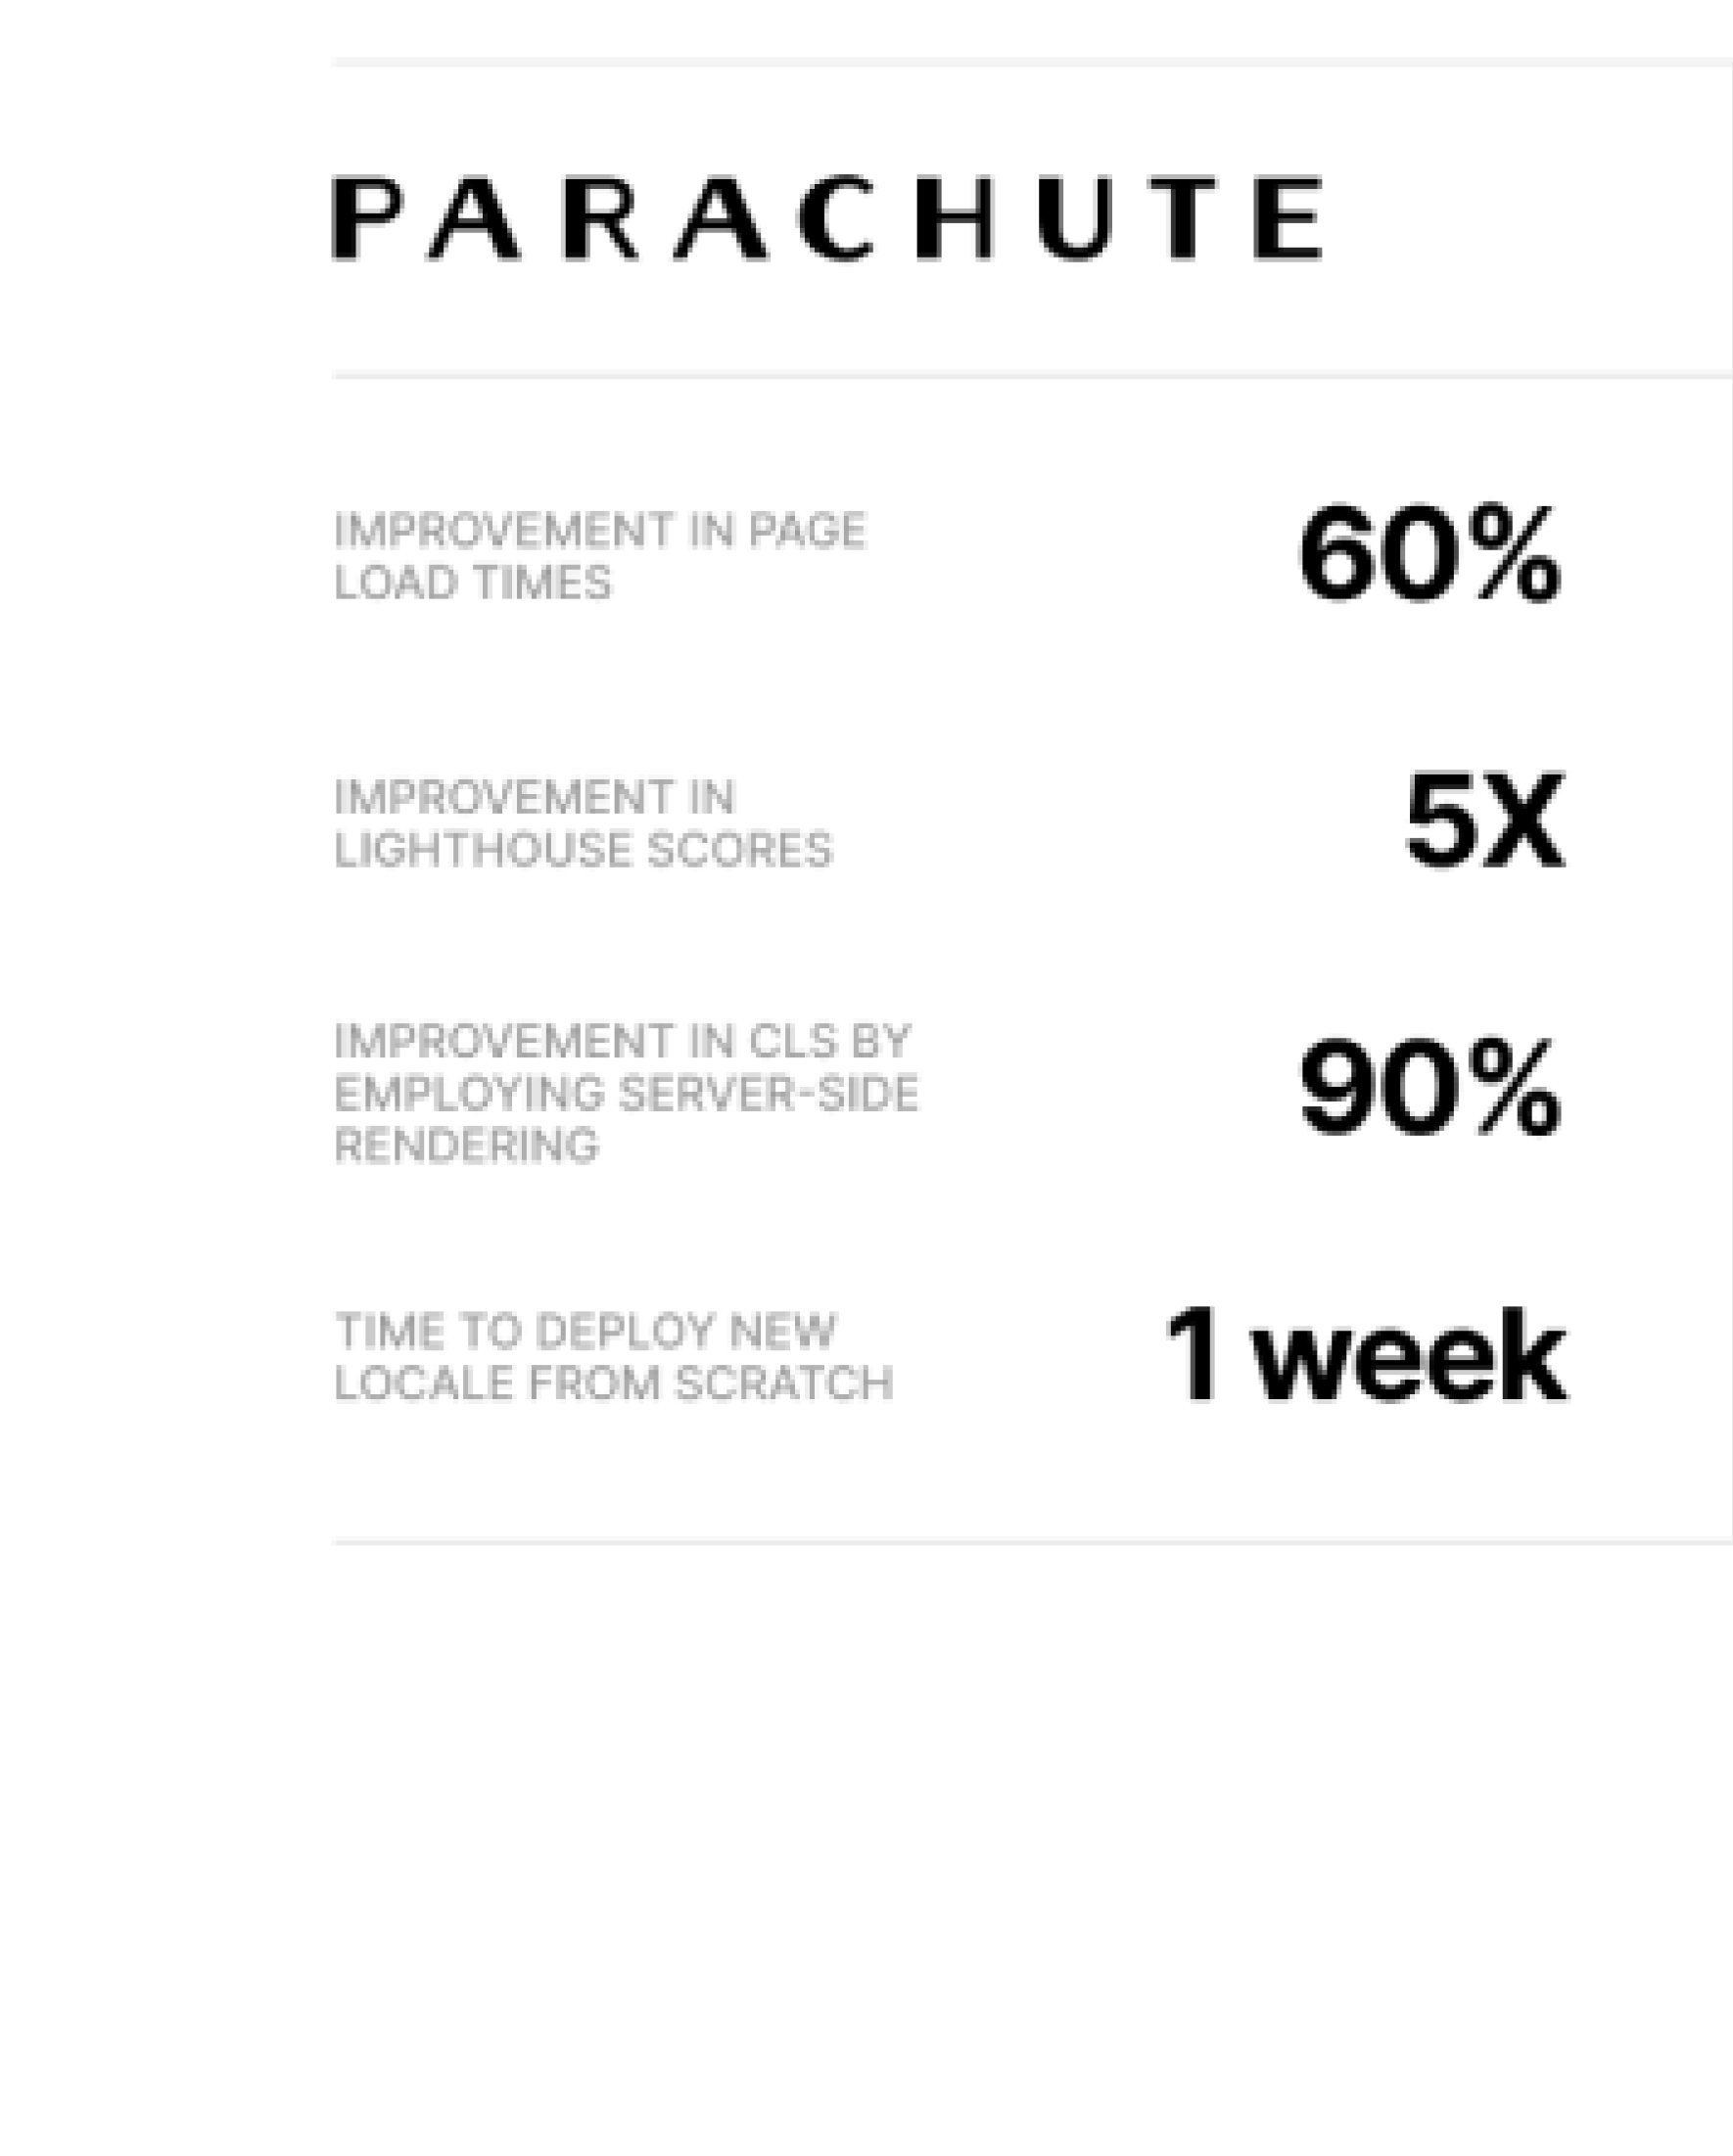 Parachute improves site page load  times by 60% in one month